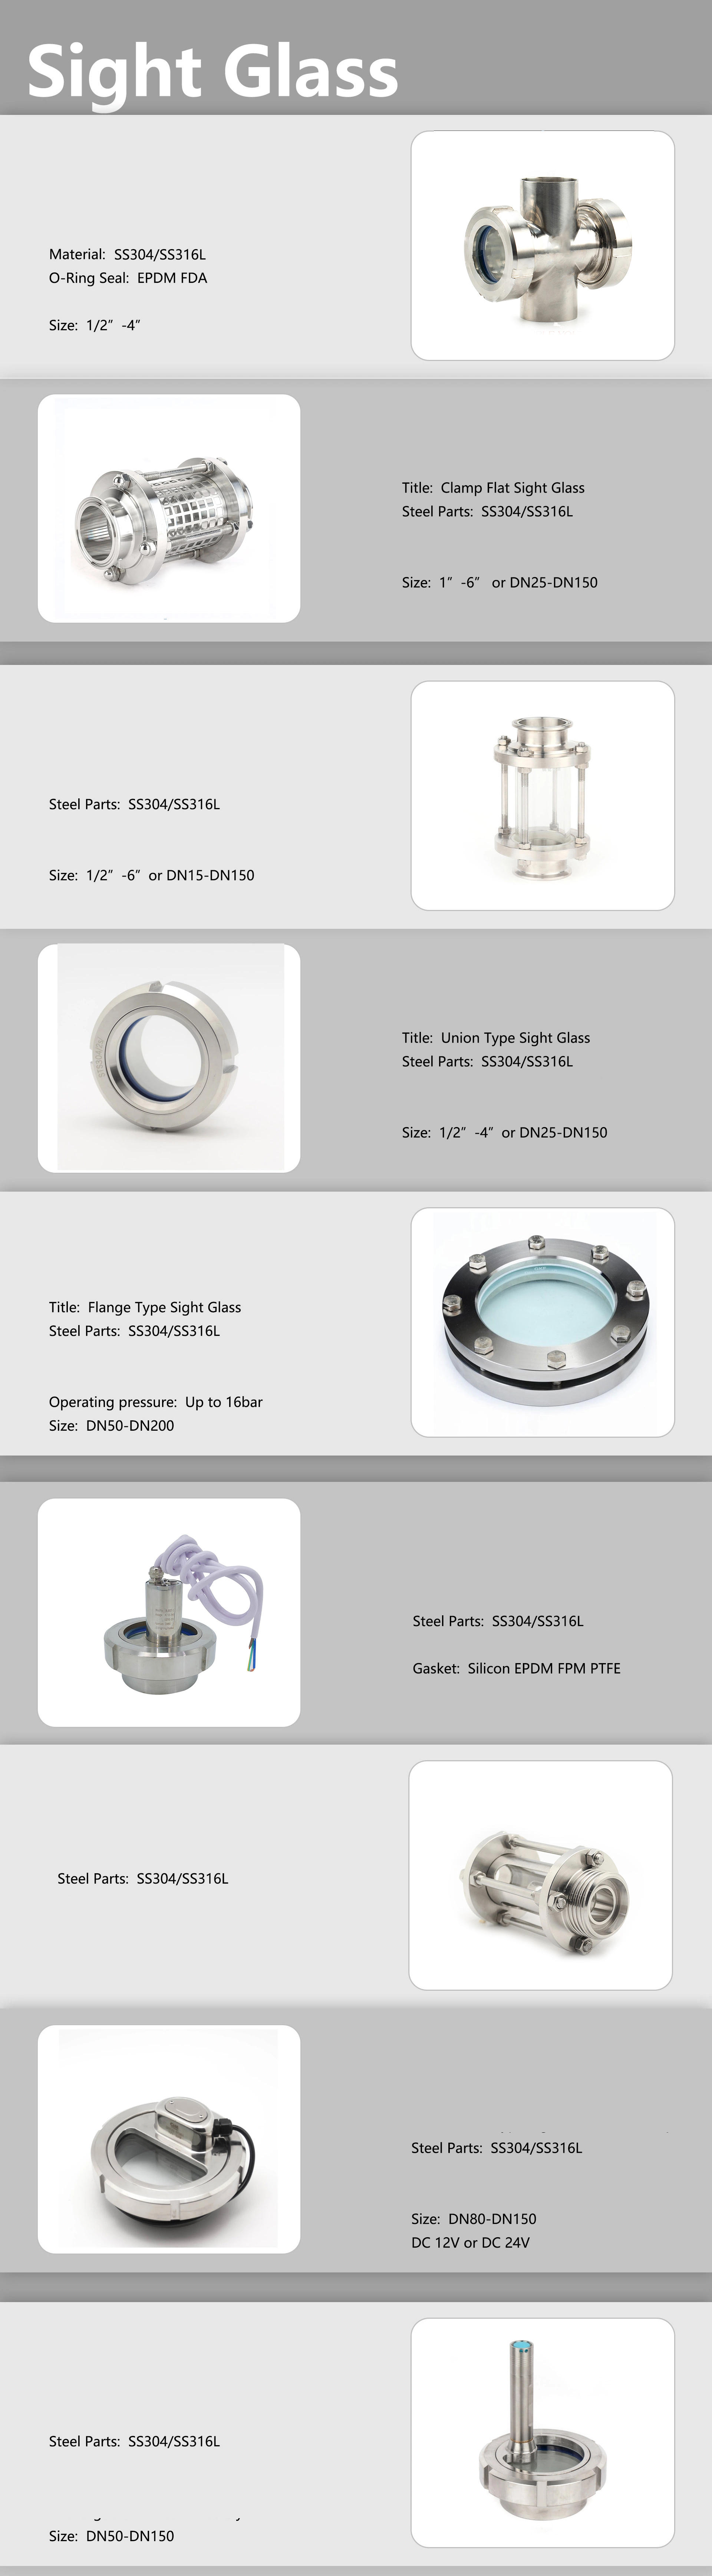 Sanitary Stainless Steel Sight Glass